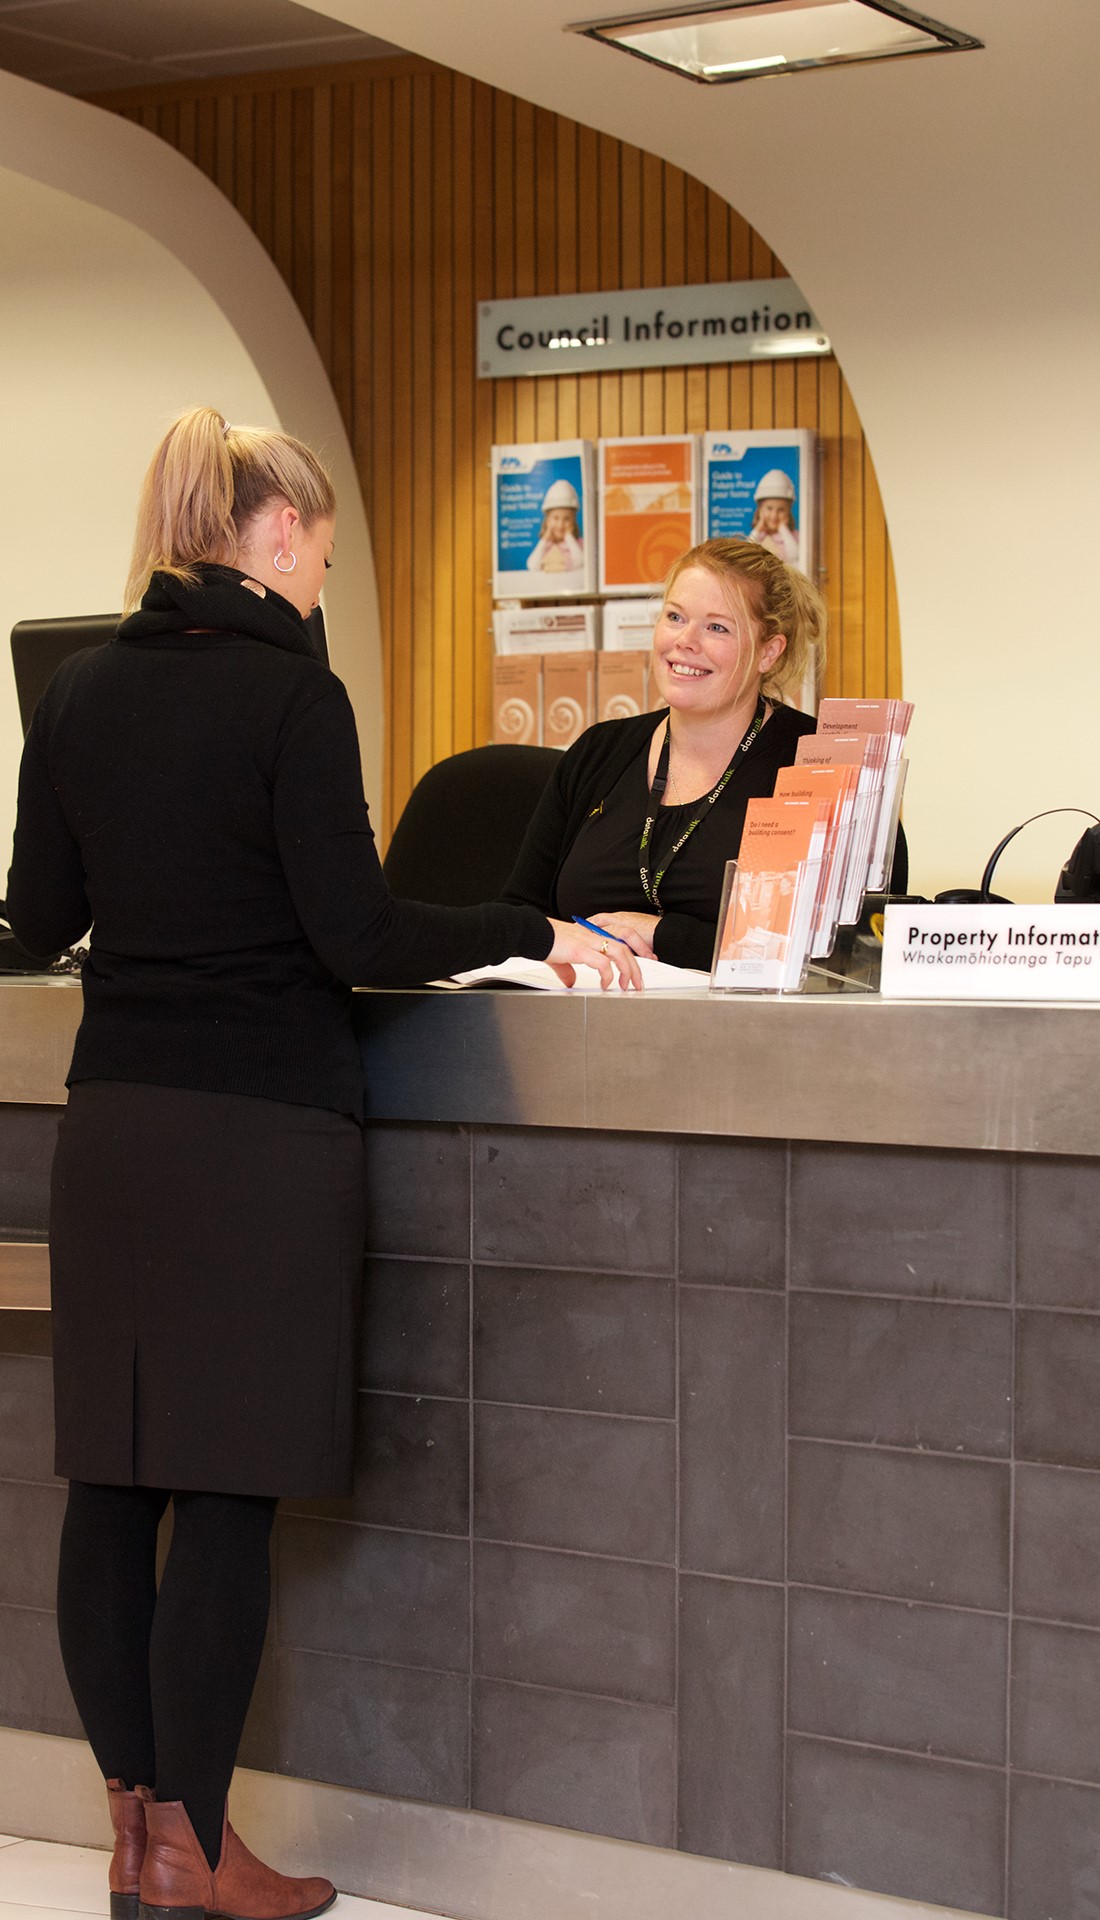 A woman at the front counter in the Civic Centre